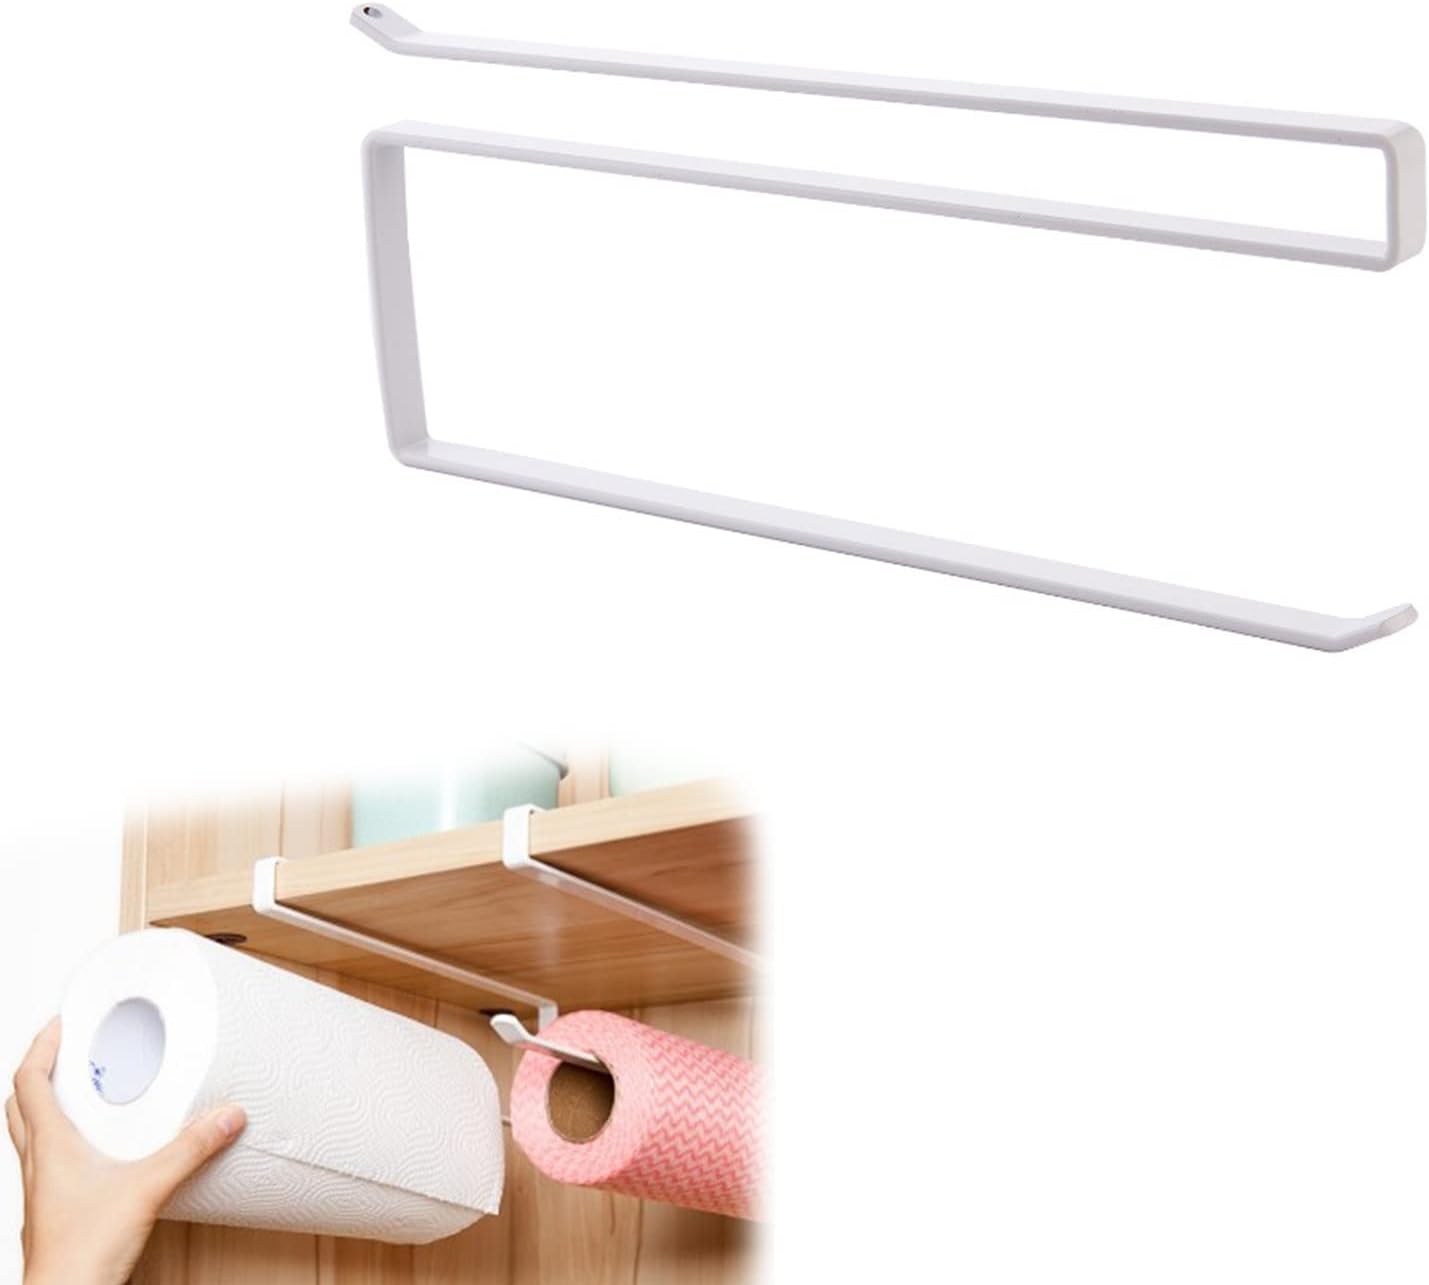 Kichen Towel Paper Holder Hanging on The Cabinet Door for Bathroom Storage and Organizing,